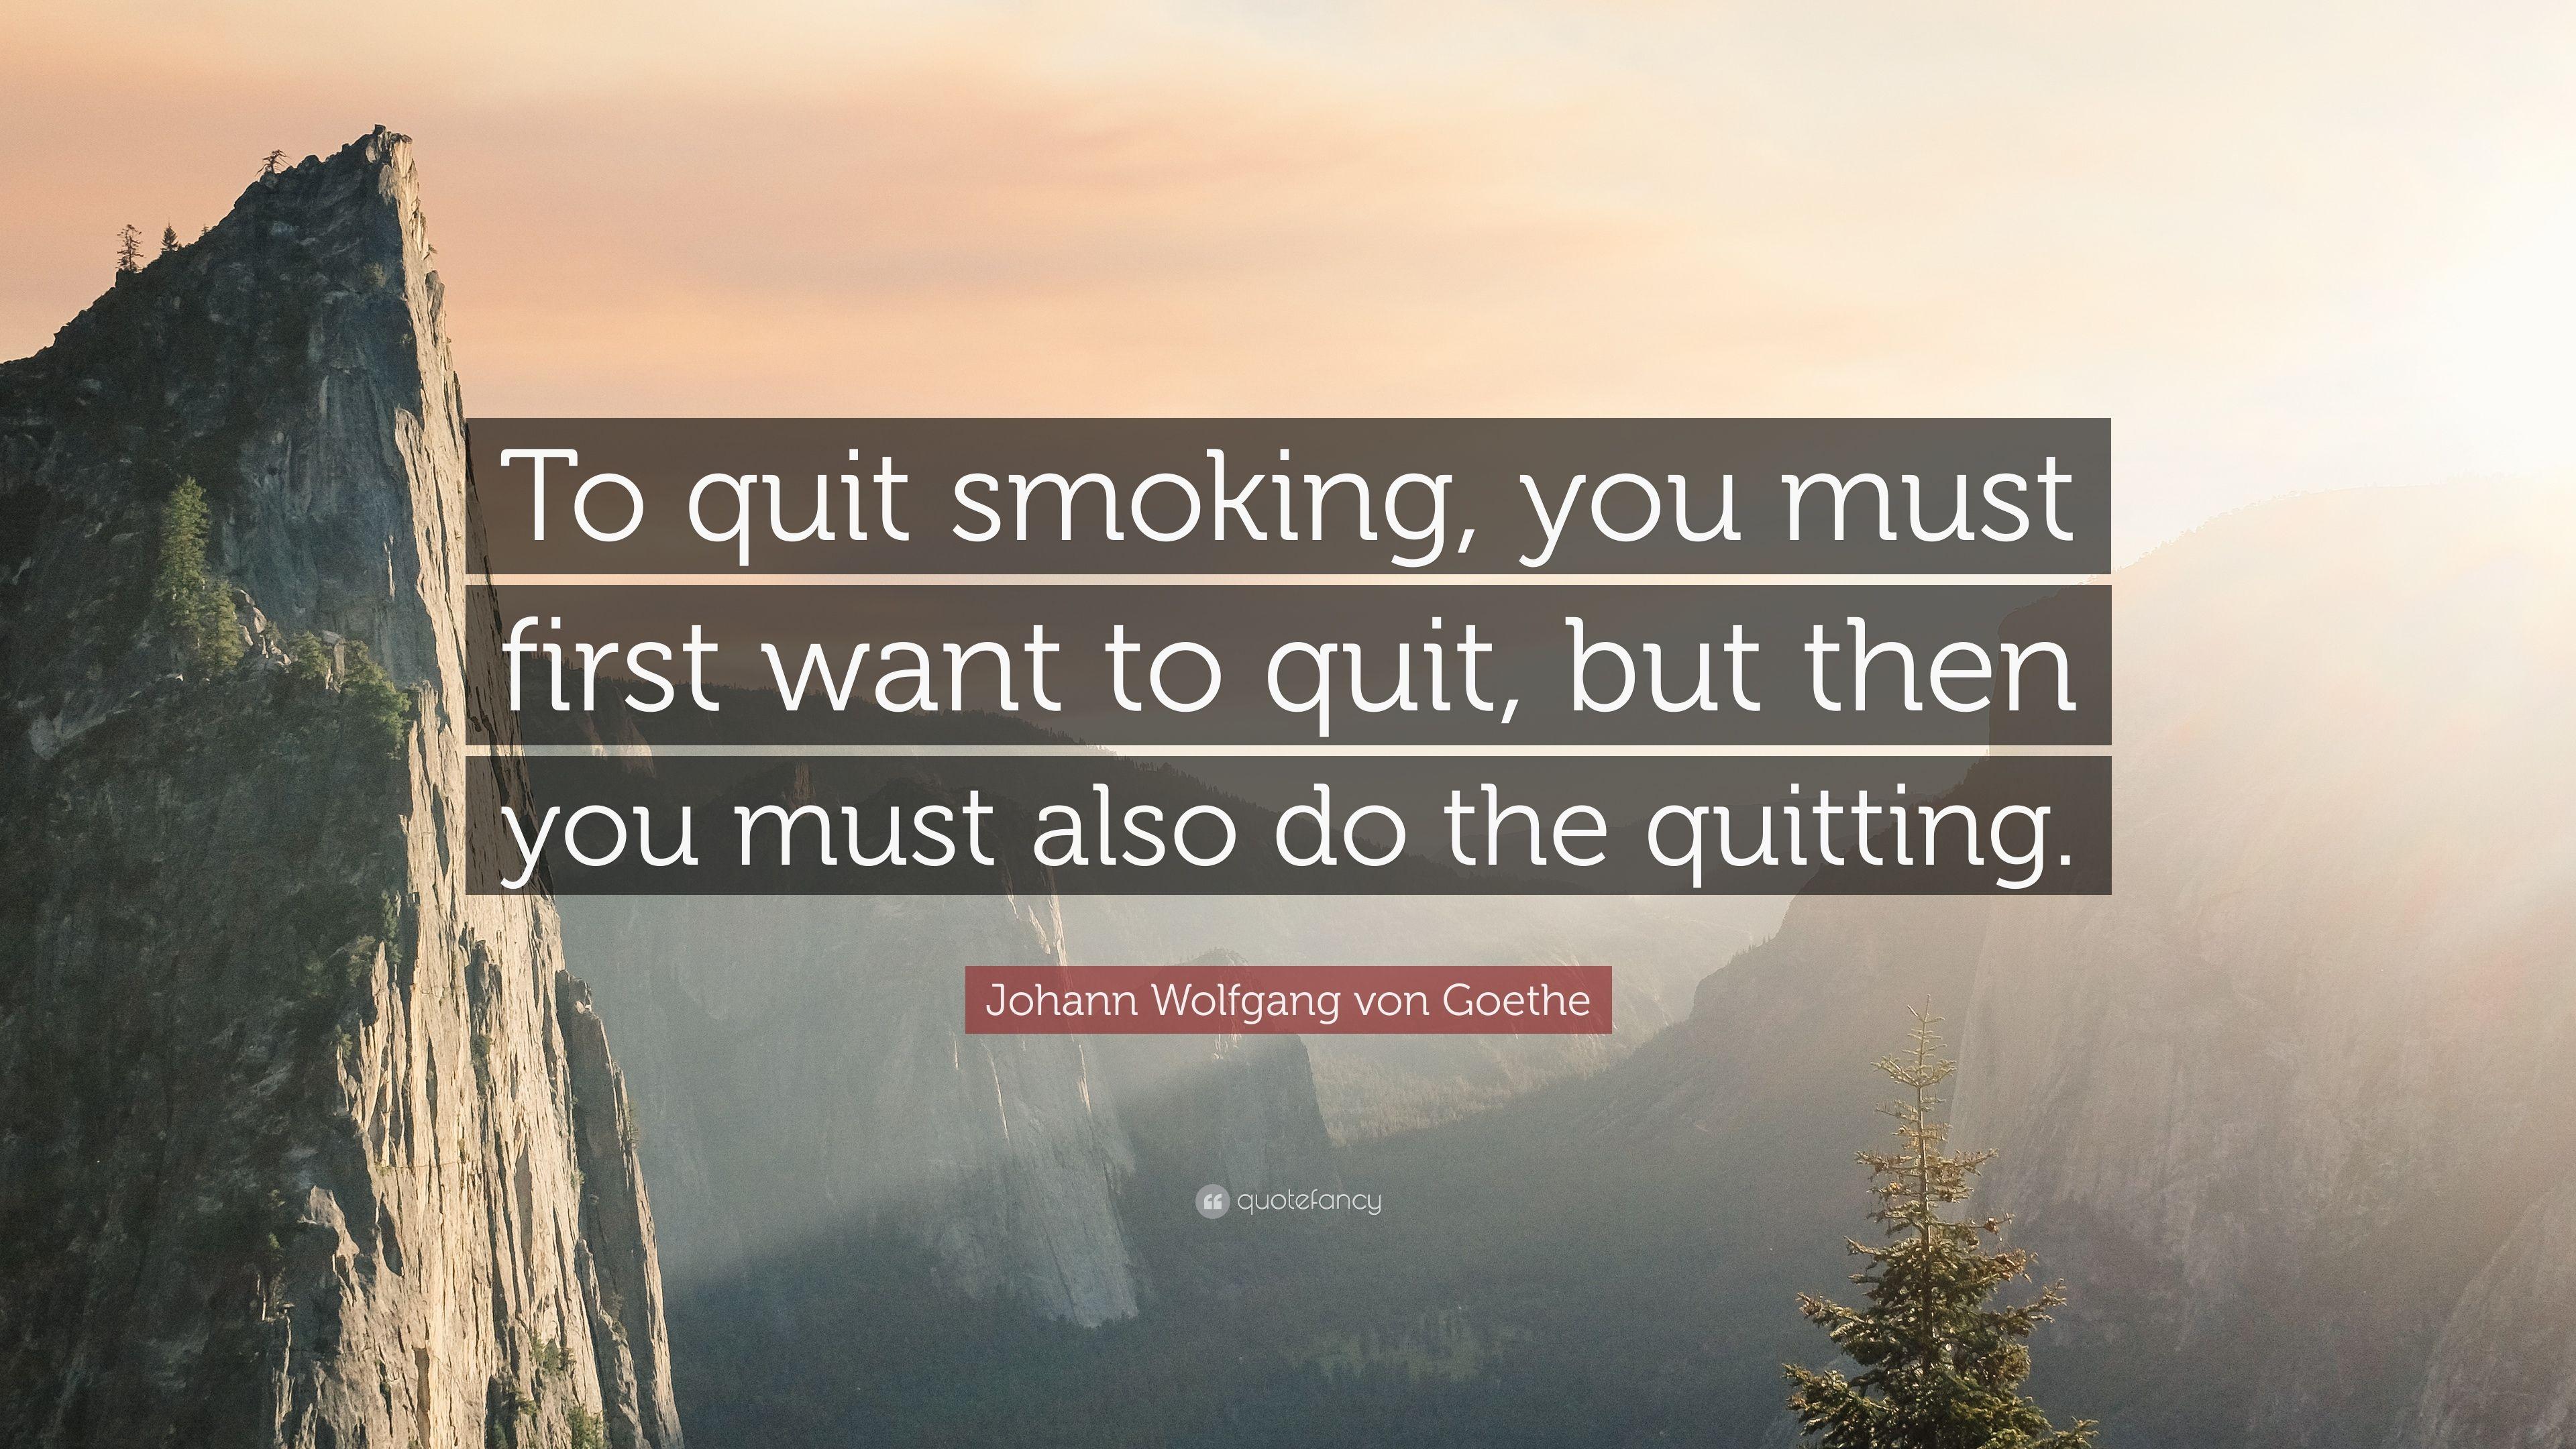 Johann Wolfgang von Goethe Quote: “To quit smoking, you must first